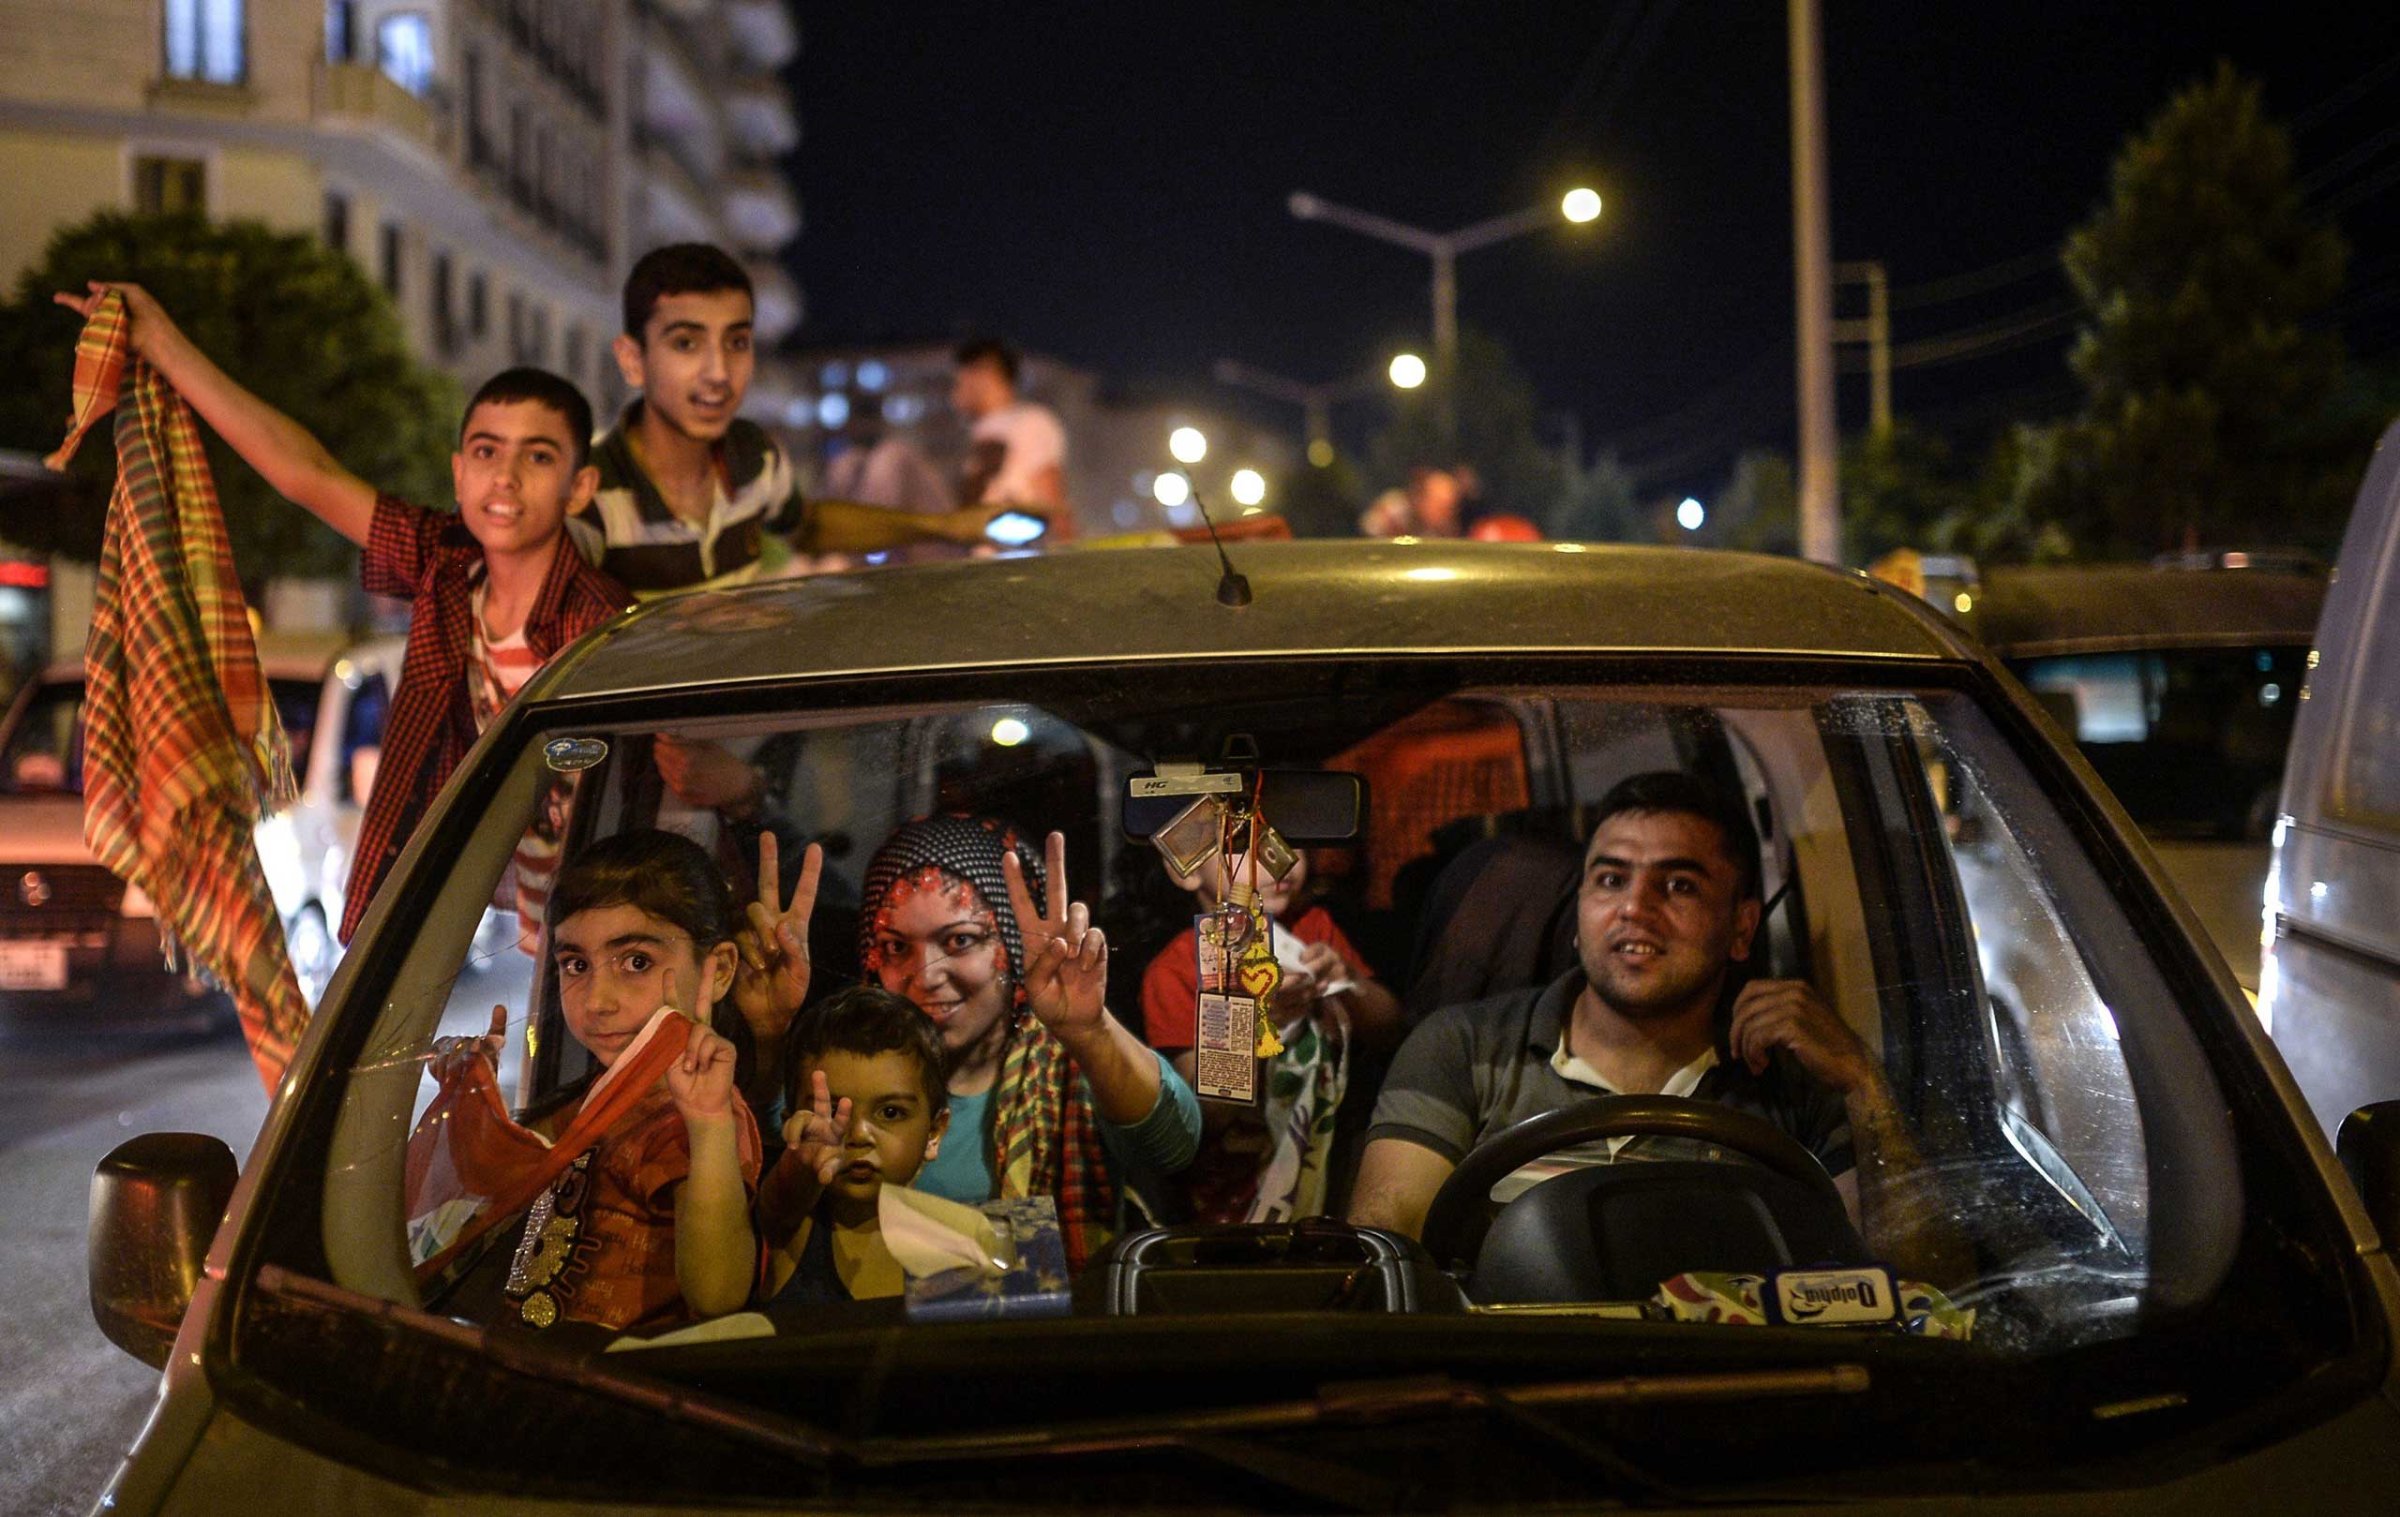 A family and children, supporters of pro-Kurdish Peoples' Democratic Party (HDP) celebrate the results of the legislative election, in Diyarbakir in Turkey on June 7, 2015.